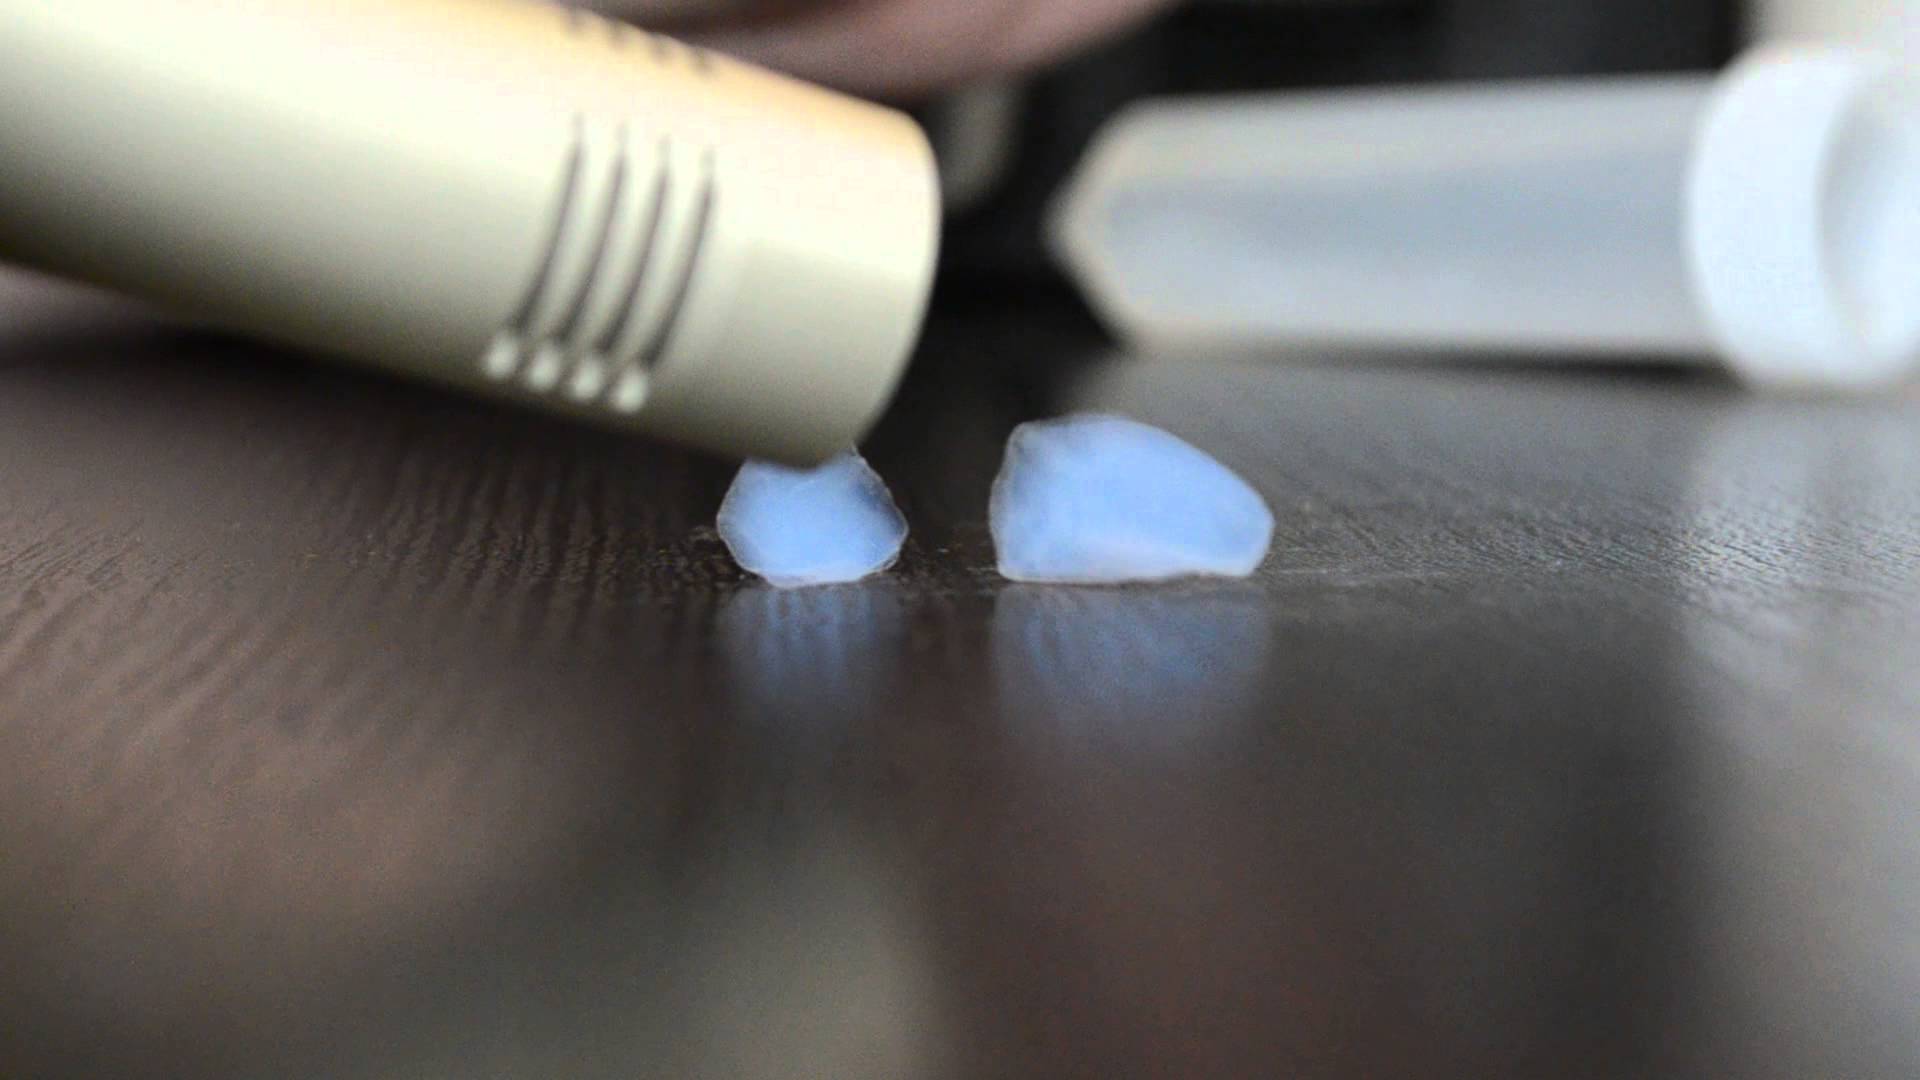 The Sound of Aerogel - World's Lightest Material